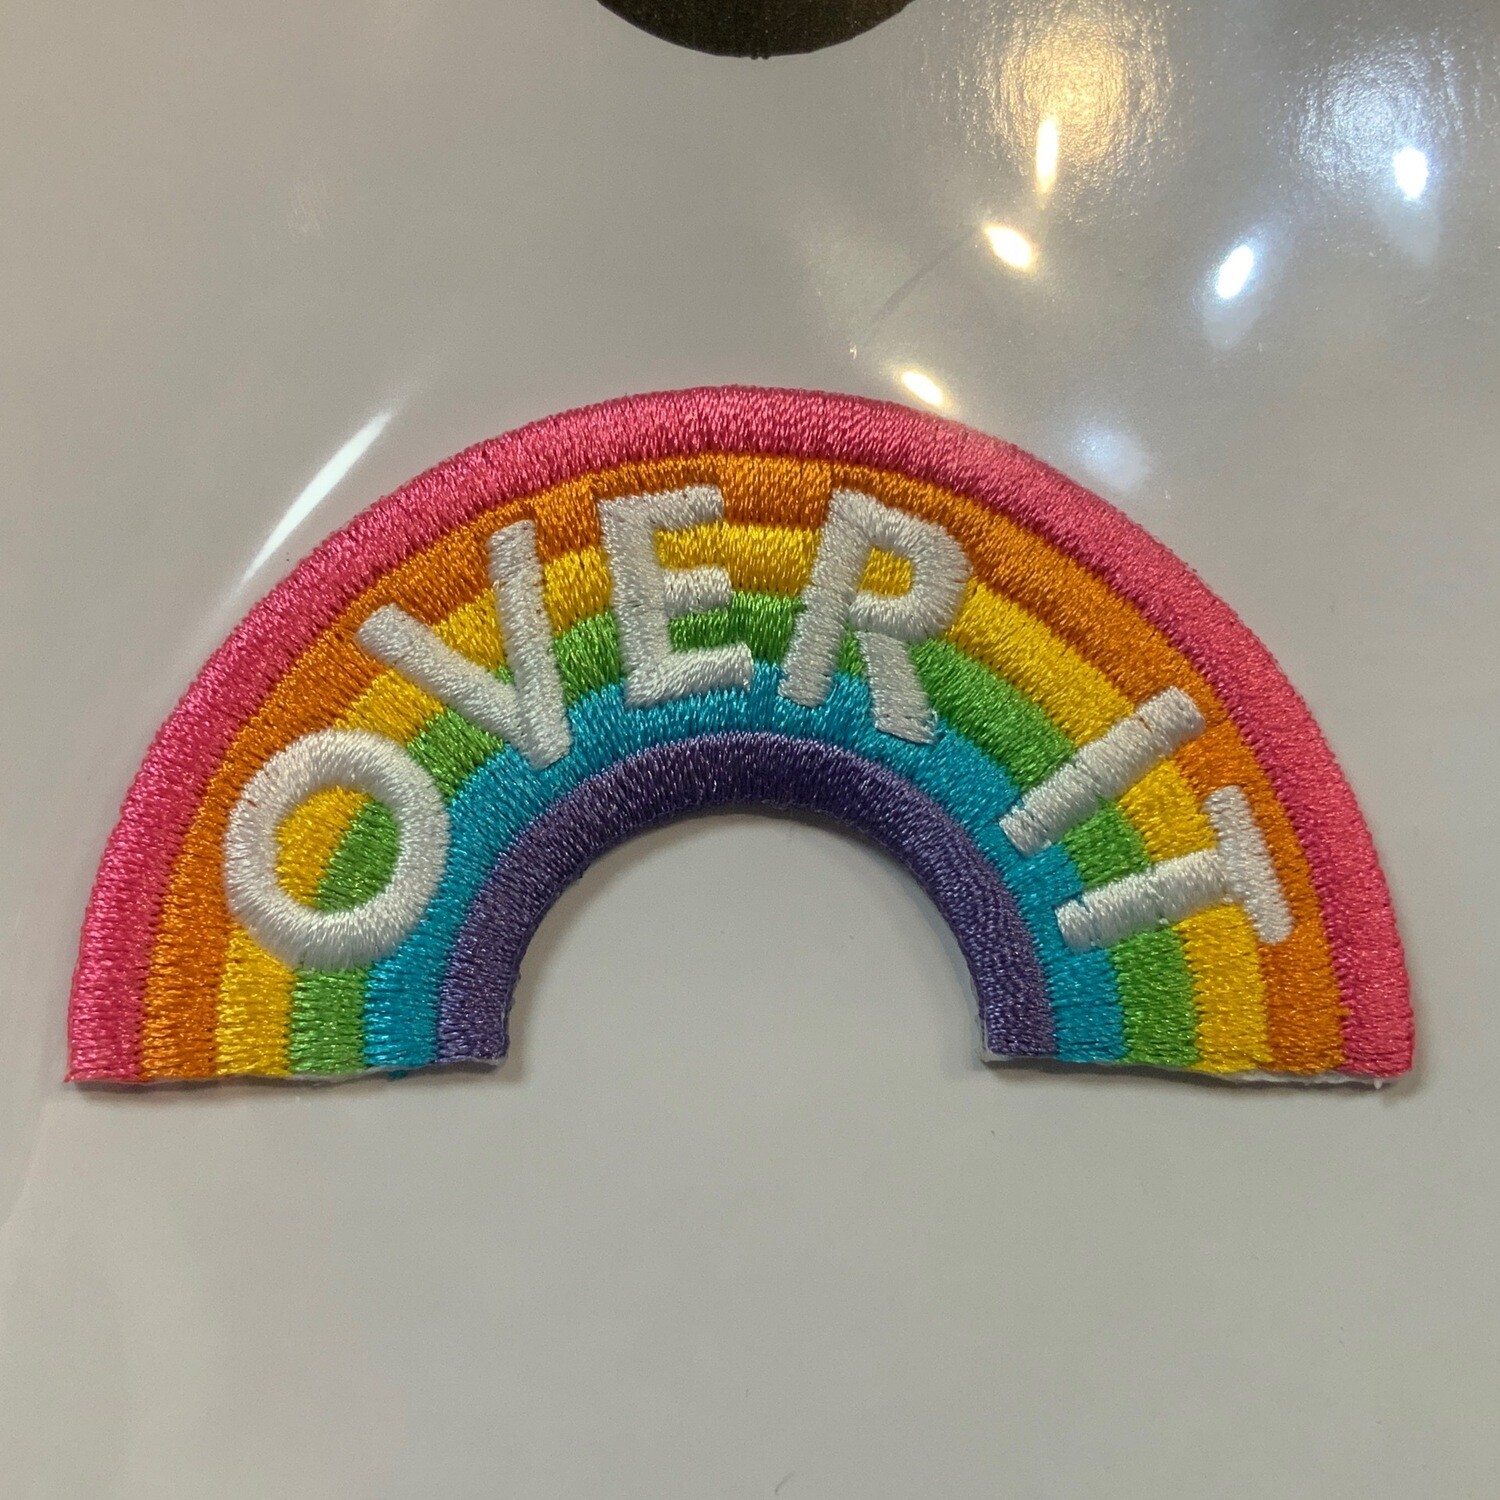 Over It - Embroidered Patch from These Are Things